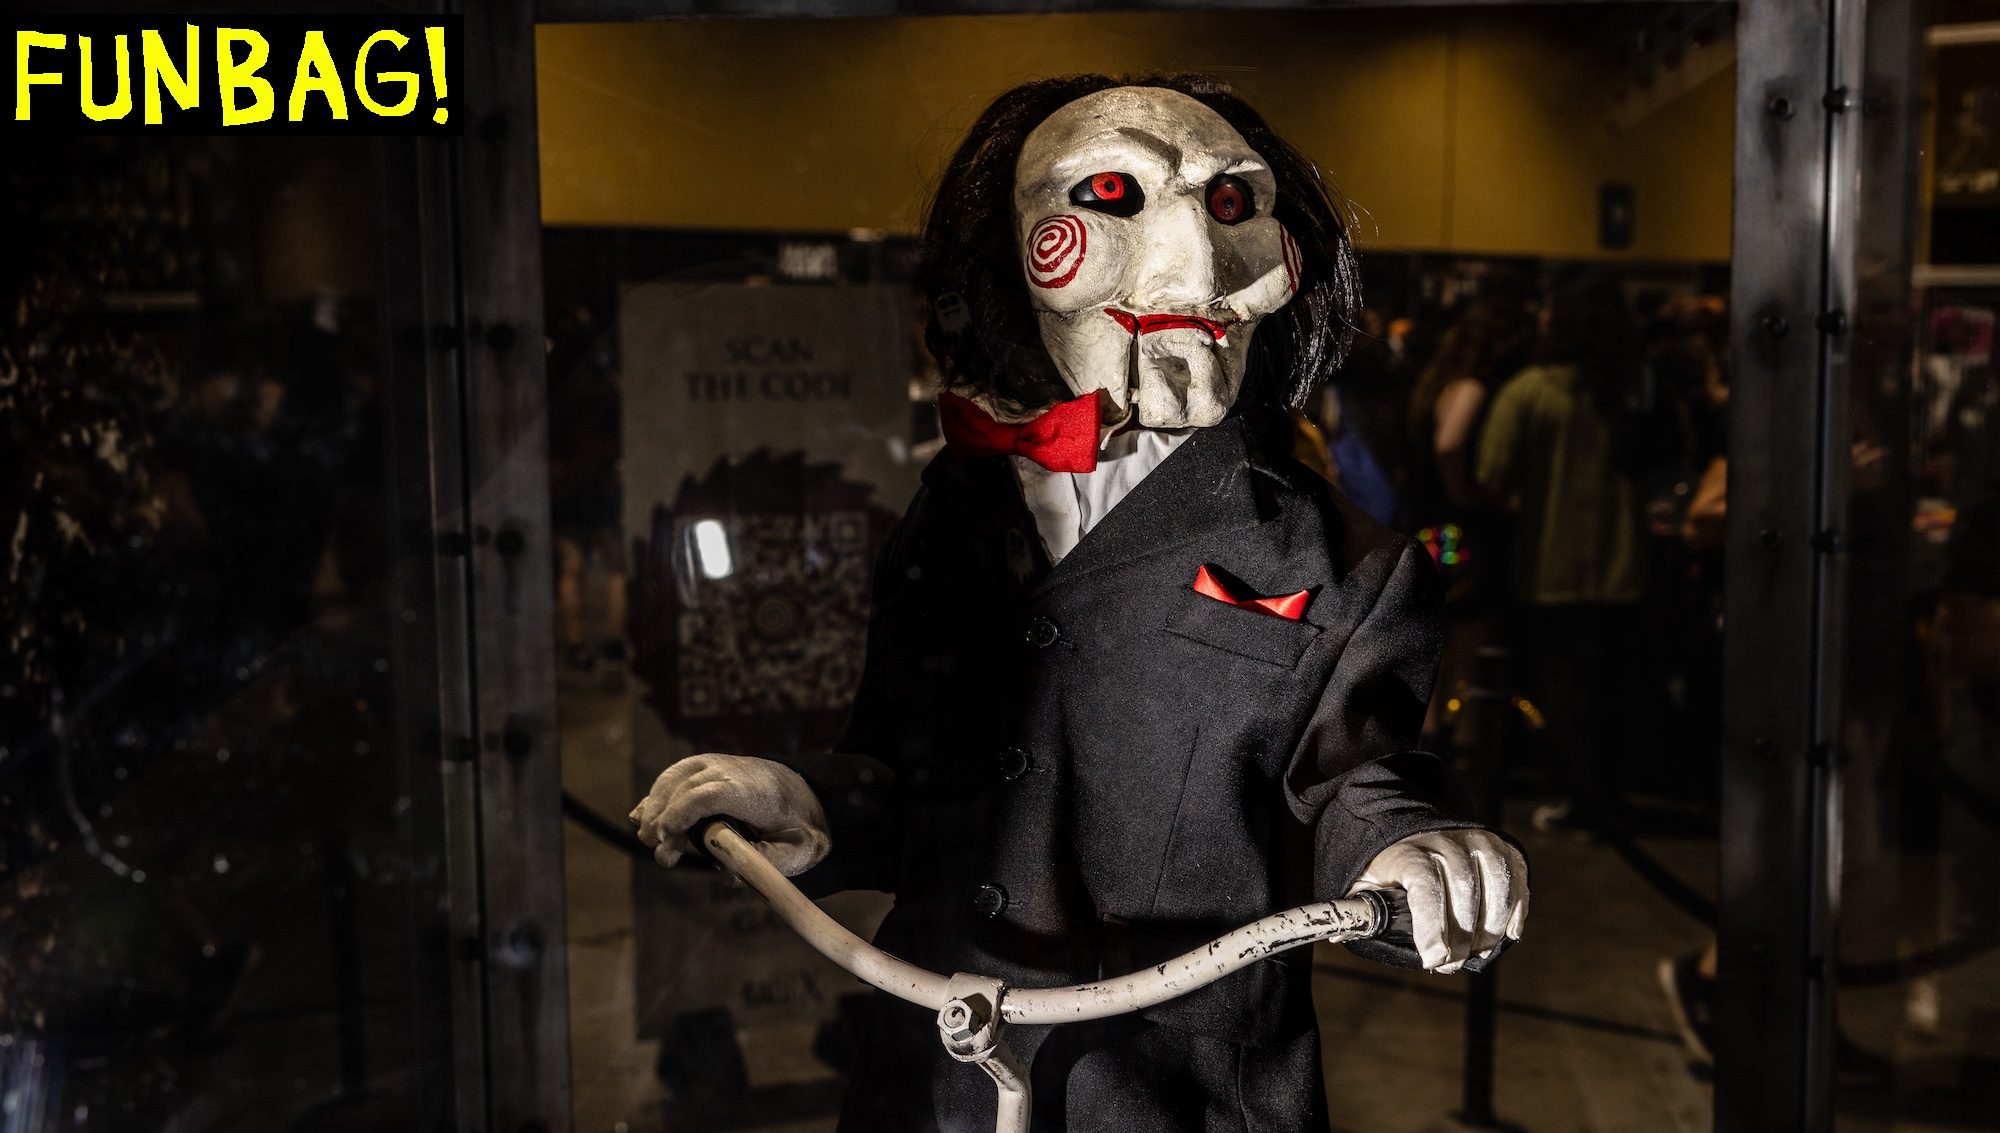 Long Beach, CA - July 29:Billy the Puppet, from the "SAW" horror film franchise, making its first public appearance, as part of the "SAW X" film promotion and exhibit inside Midsummer Scream, a Halloween and horror convention, at Long Beach Convention Center, in Long Beach, CA, Saturday, July 29, 2023. The latest installment of the series follows serial killer Jigsaw, as he exacts revenge against con artists. The gathering, from Friday through Sunday, features all things Halloween and in the horror genre, with many attendees dressing up as their favorite characters, across TV, film, comics and animation. (Jay L. Clendenin / Los Angeles Times via Getty Images)